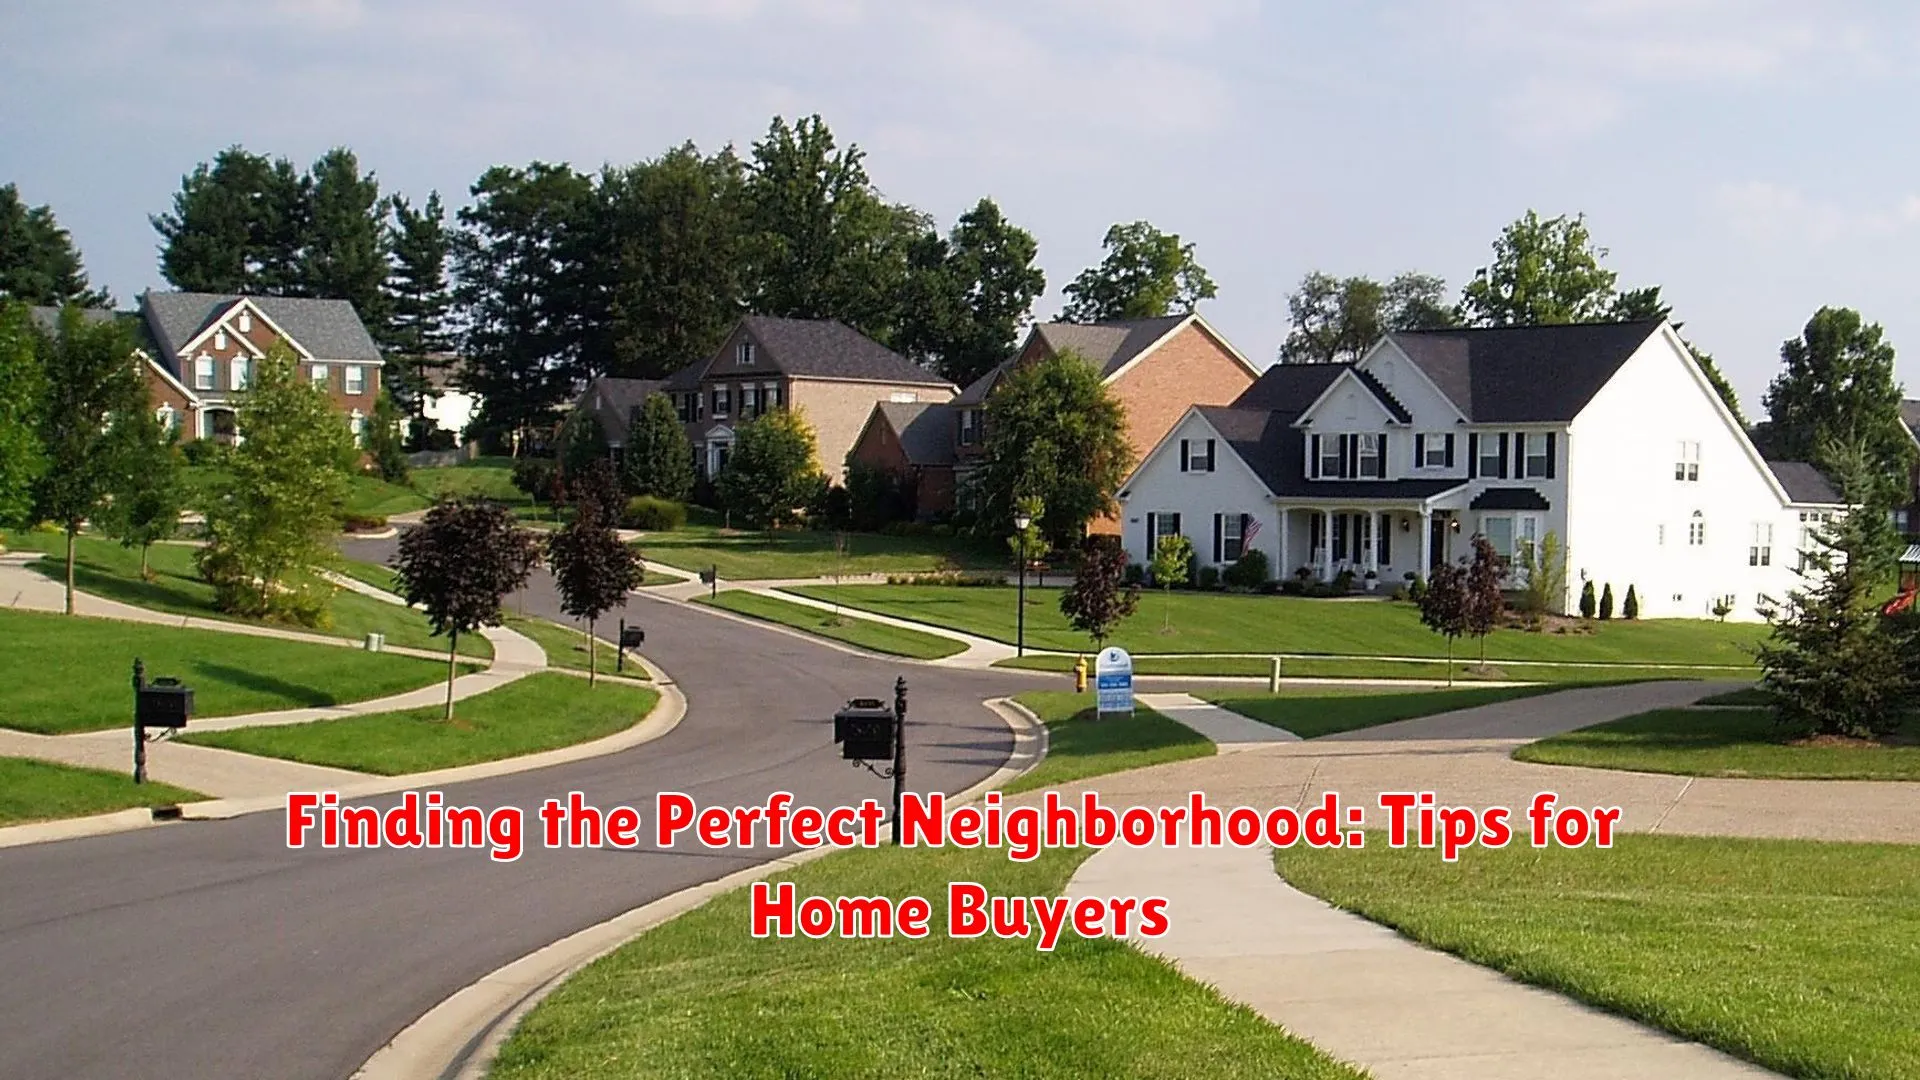 Finding the Perfect Neighborhood: Tips for Home Buyers